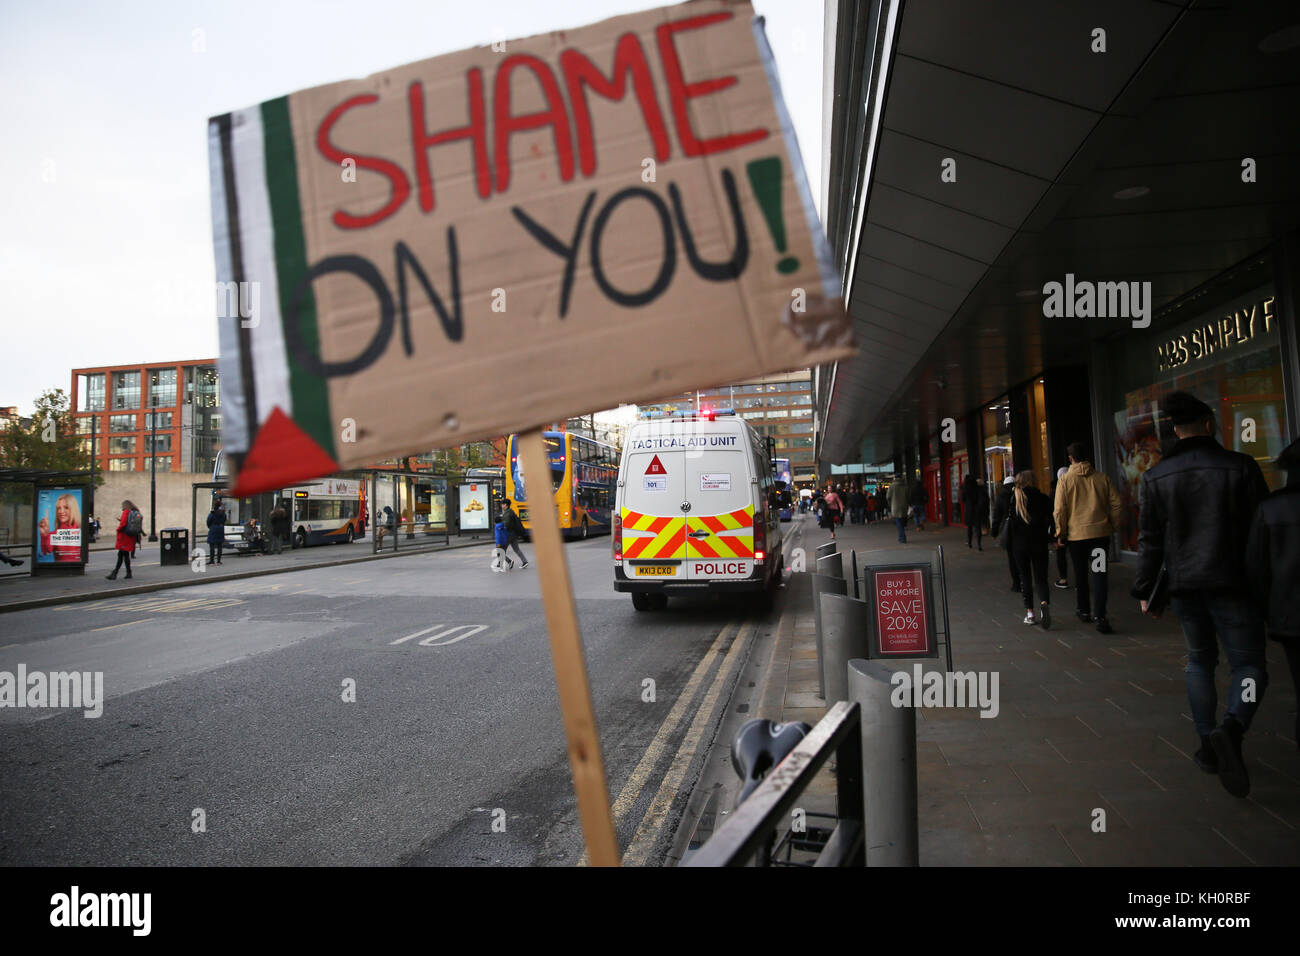 Manchester, UK. 11th Nov, 2017. A placard reading 'Shame On You' on railings with a Tactical Aid Unit van in the background, Manchester, 11th November, 2017 Credit: Barbara Cook/Alamy Live News Stock Photo